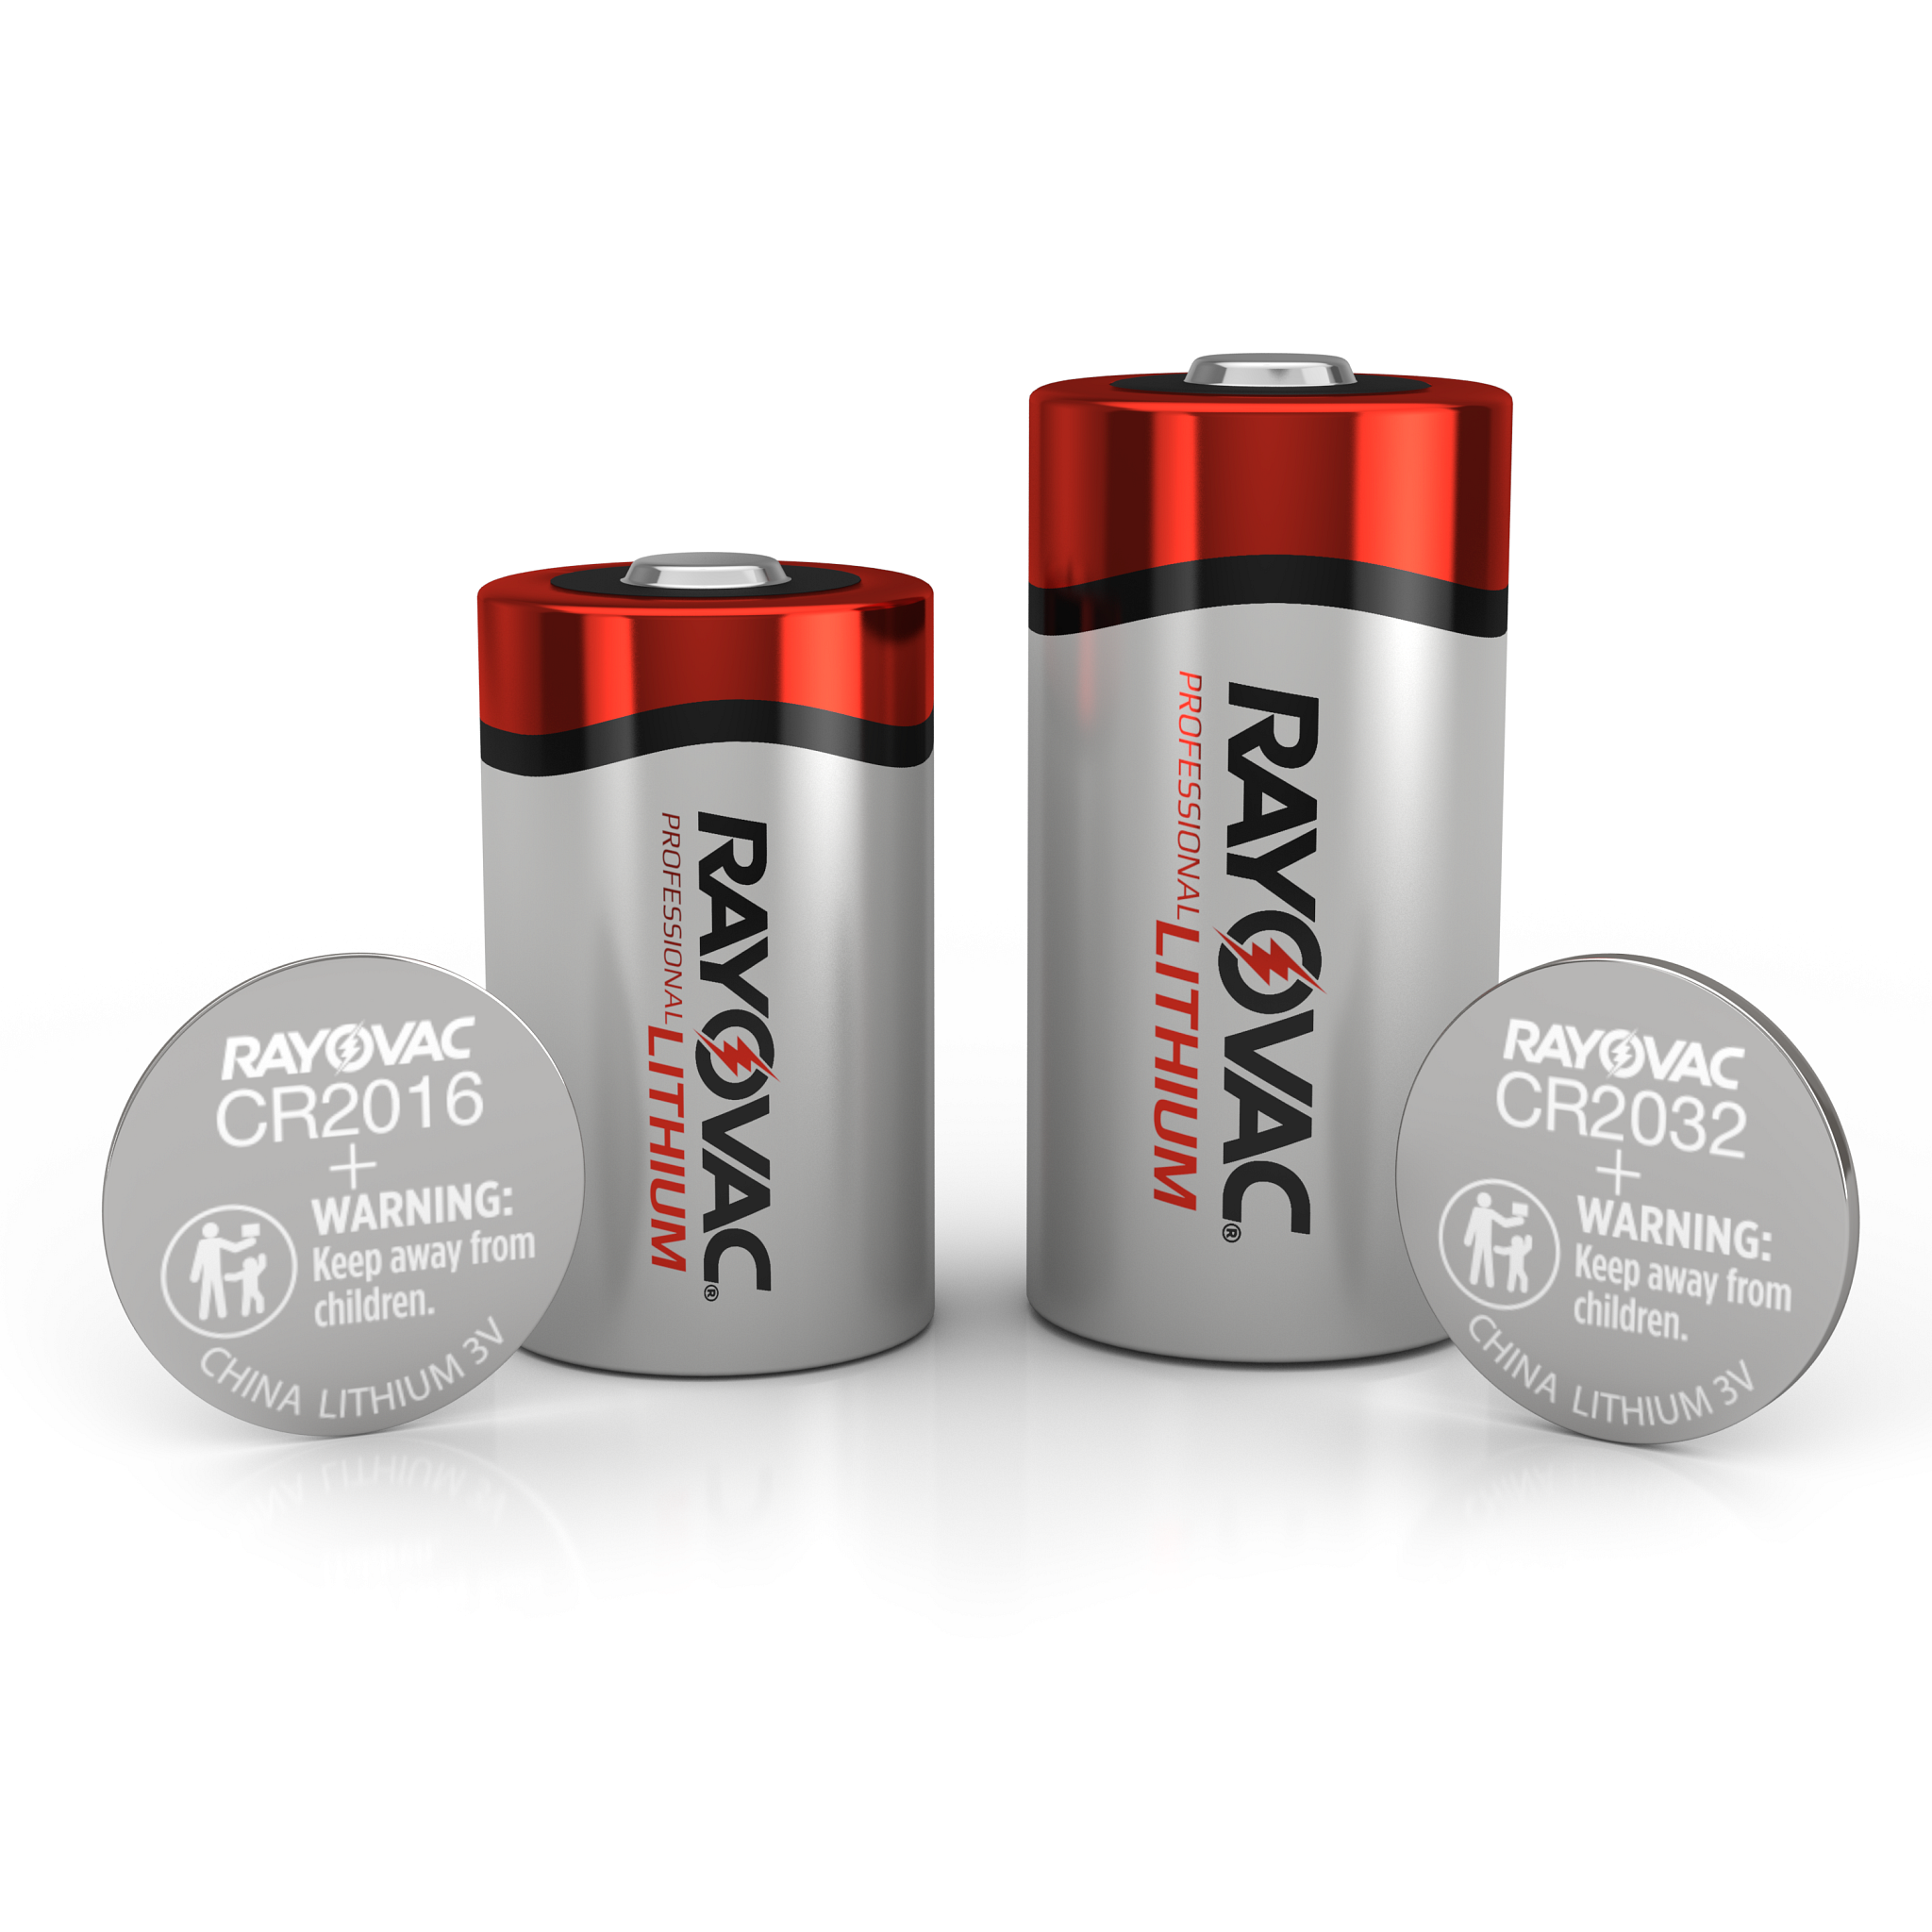 Rayovac Industrial speciality batteries range of products